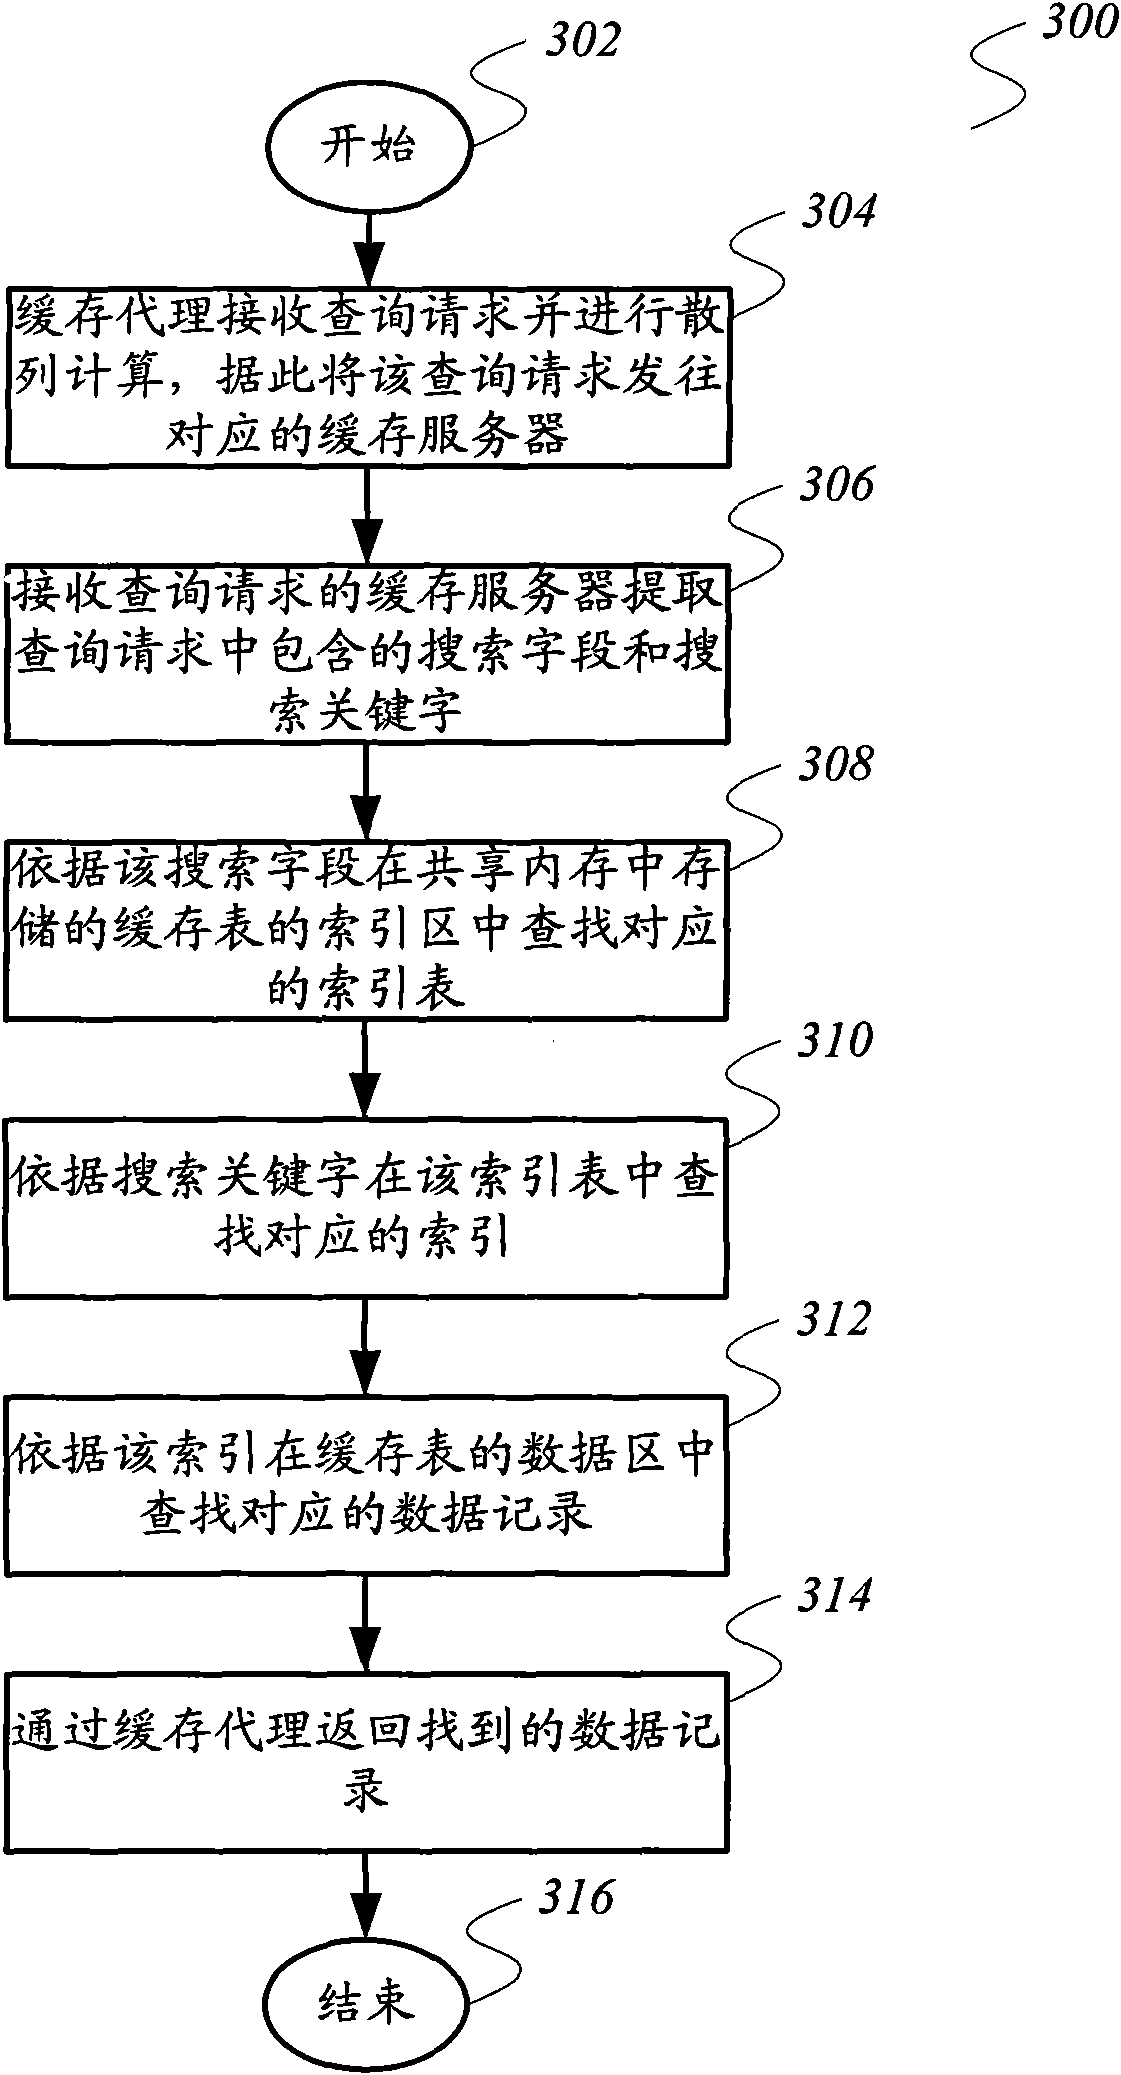 Data caching system and data query method